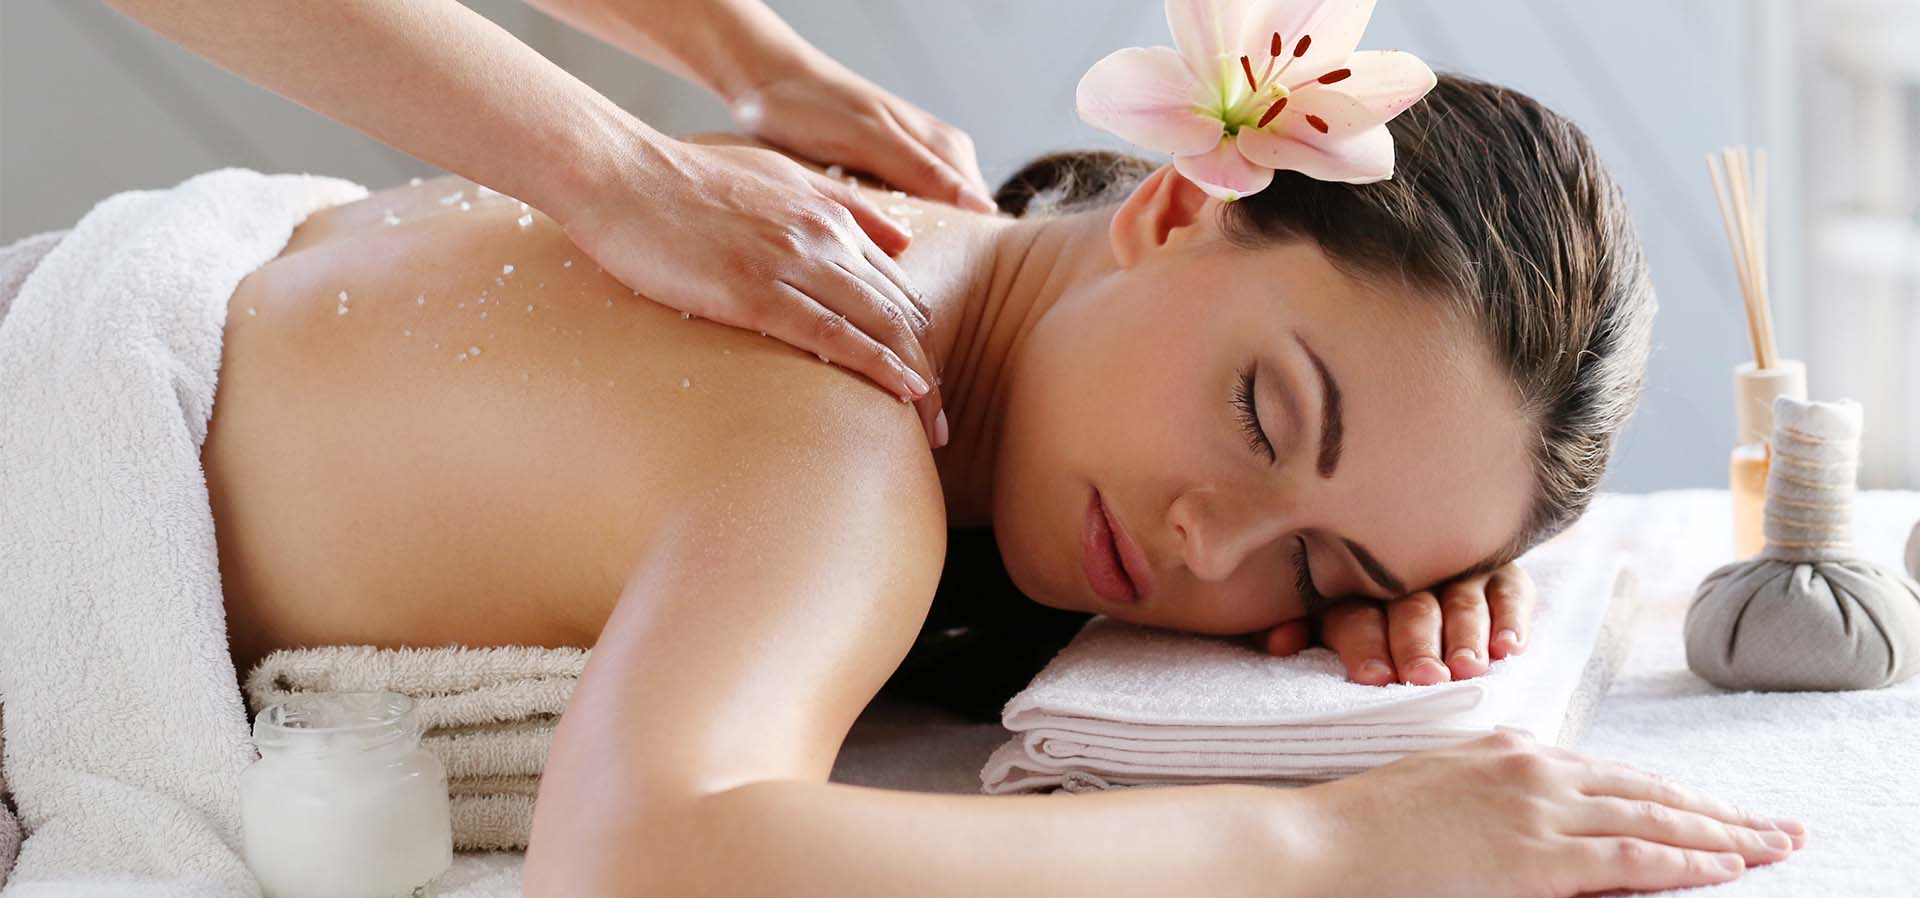 facial and massage therapy treatment hub in coral spring florida